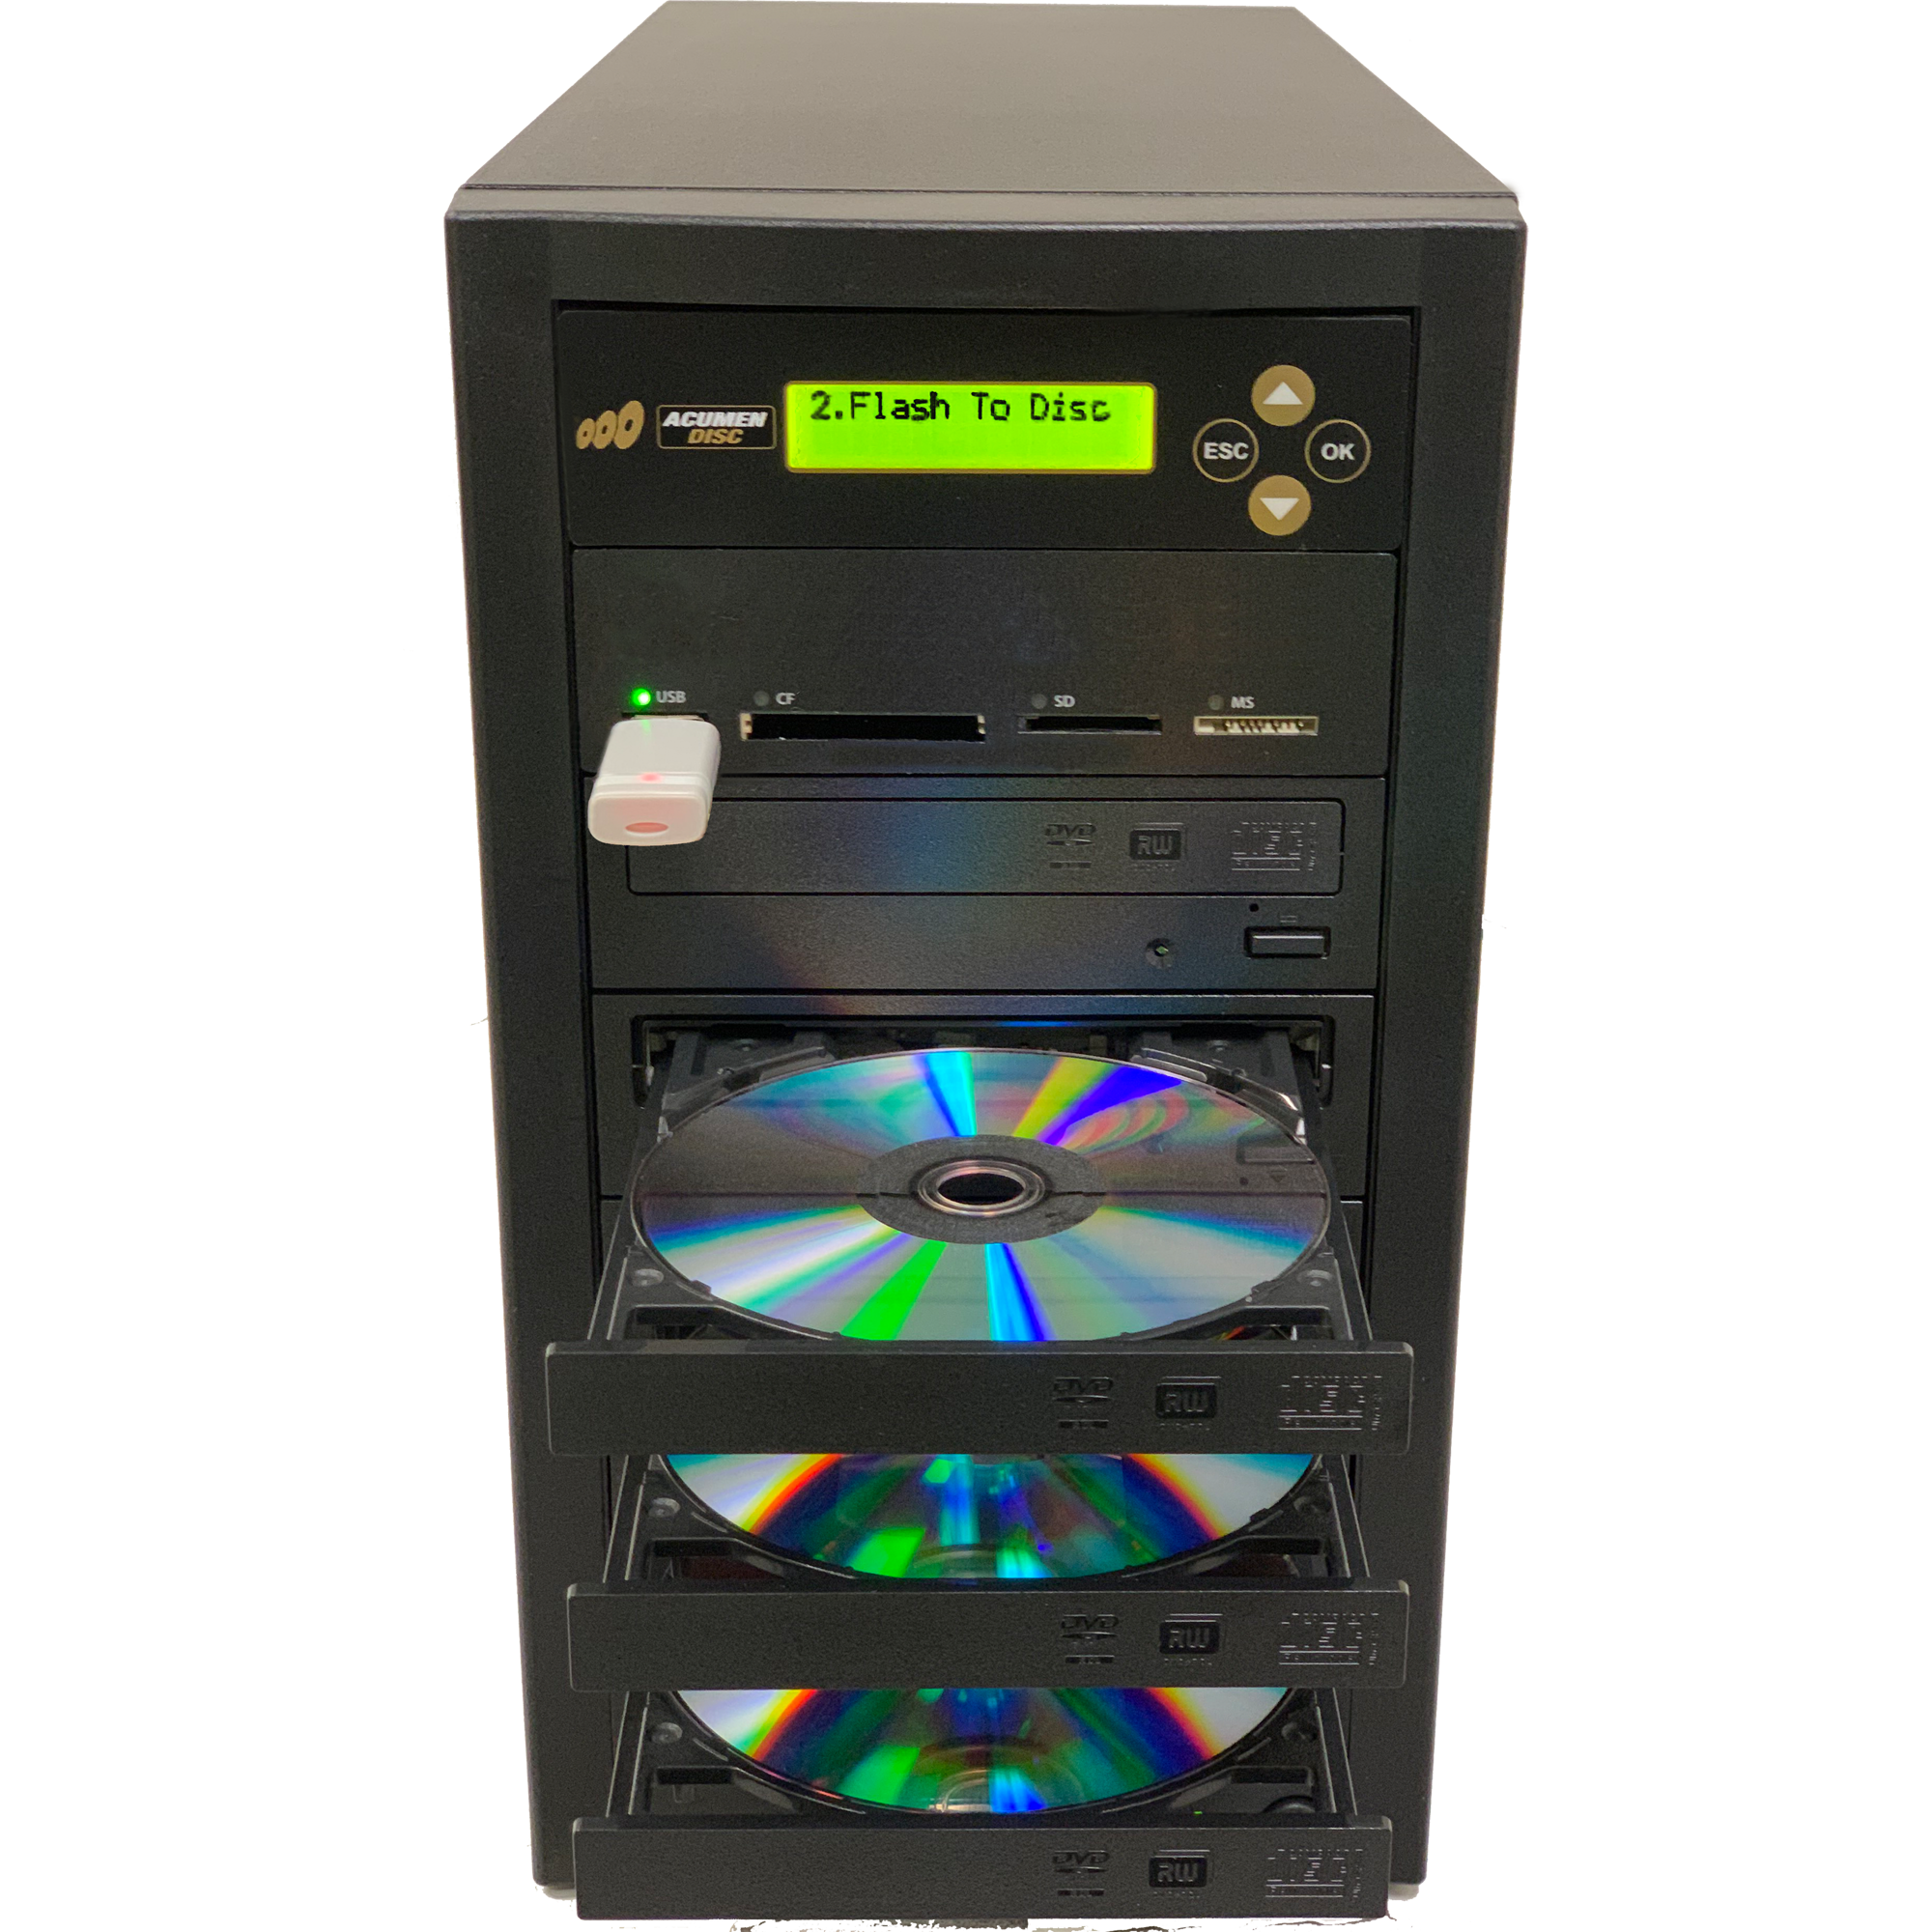 Acumen Disc 1 to 2 Flash Media (CF / SD / USB / MMS) to Multiple (DVD/CD) Discs Copier Duplicator Tower System - image 2 of 7